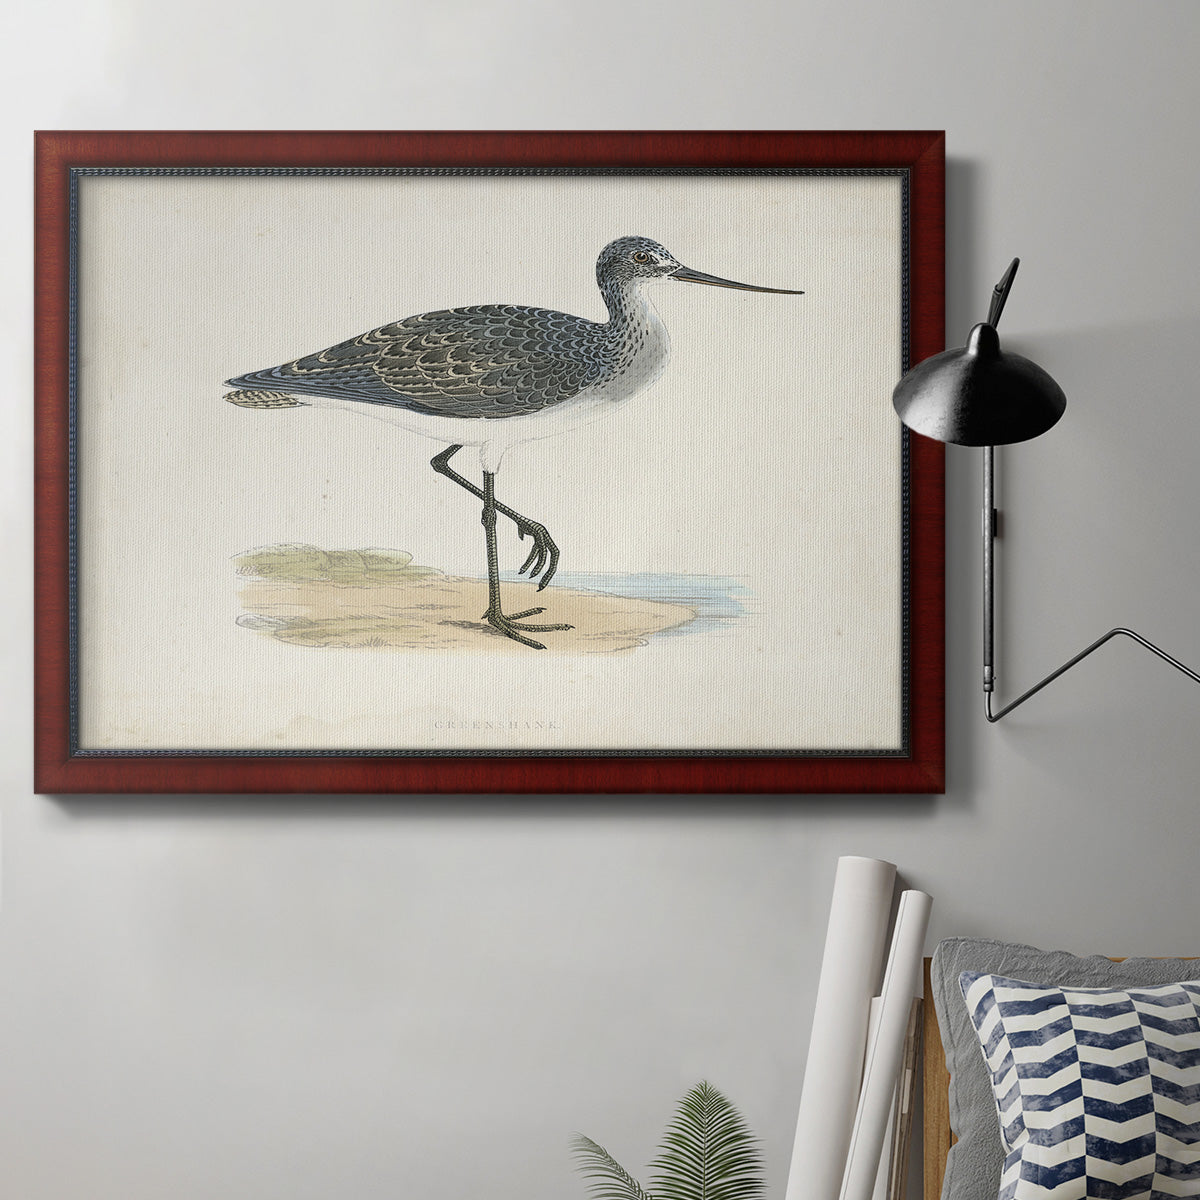 Morris Sandpipers III Premium Framed Canvas- Ready to Hang